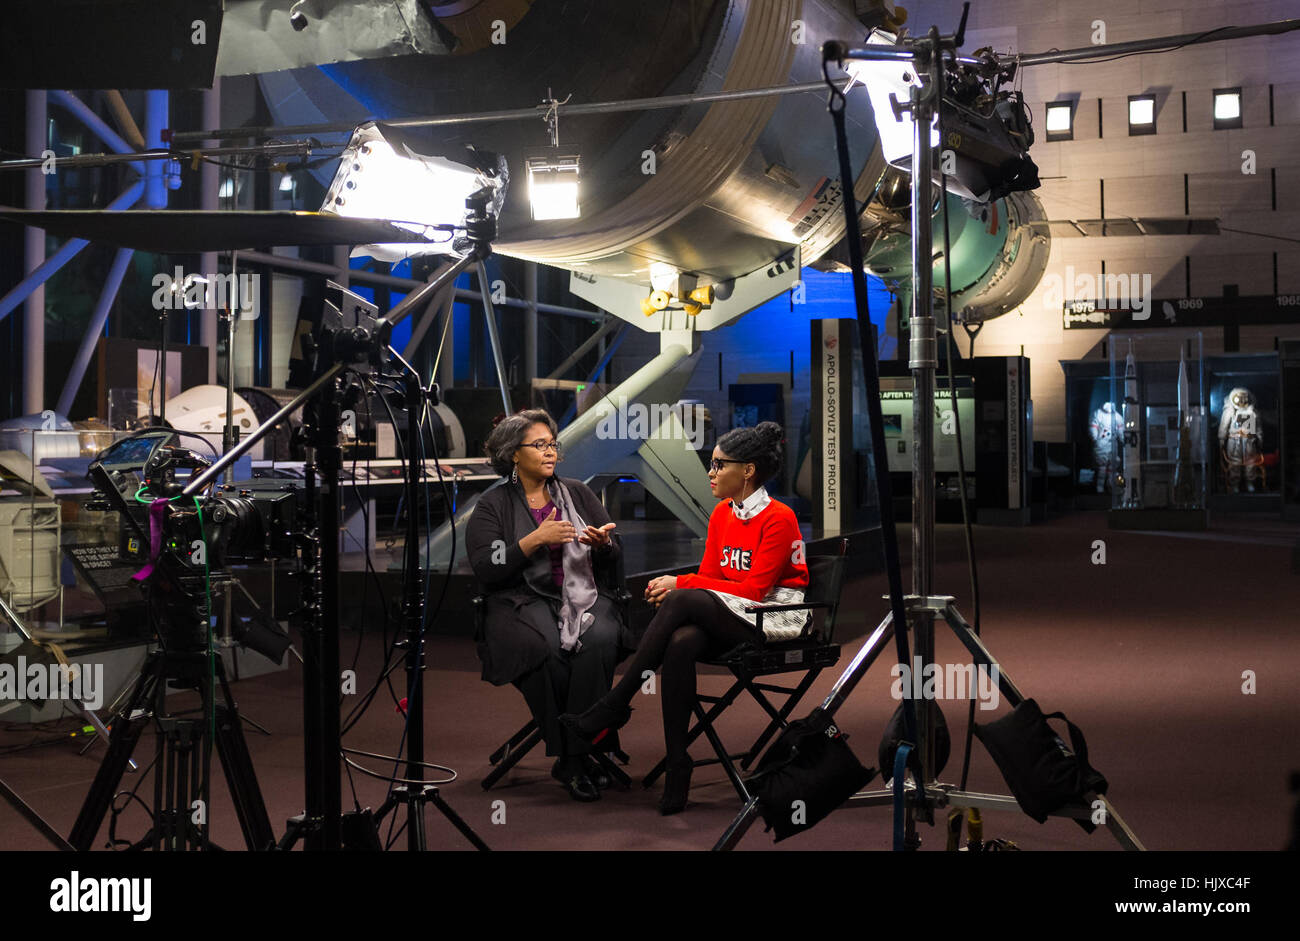 Program Executive for Game Changing Development in NASA’s Space Technology Mission Directorate LaNetra Tate, left, speaks with American musical recording artist, actress, and model Janelle Monáe, right, about the movie “Hidden Figures” during taping of media interviews, Tuesday, Dec. 13, 2016, at the Smithsonian’s National Air and Space Museum in Washington, DC. The film is based on the book of the same title, by Margot Lee Shetterly, and chronicles the lives of Katherine Johnson, Dorothy Vaughan and Mary Jackson -- African-American women working at NASA as “human computers,” who were critical Stock Photo